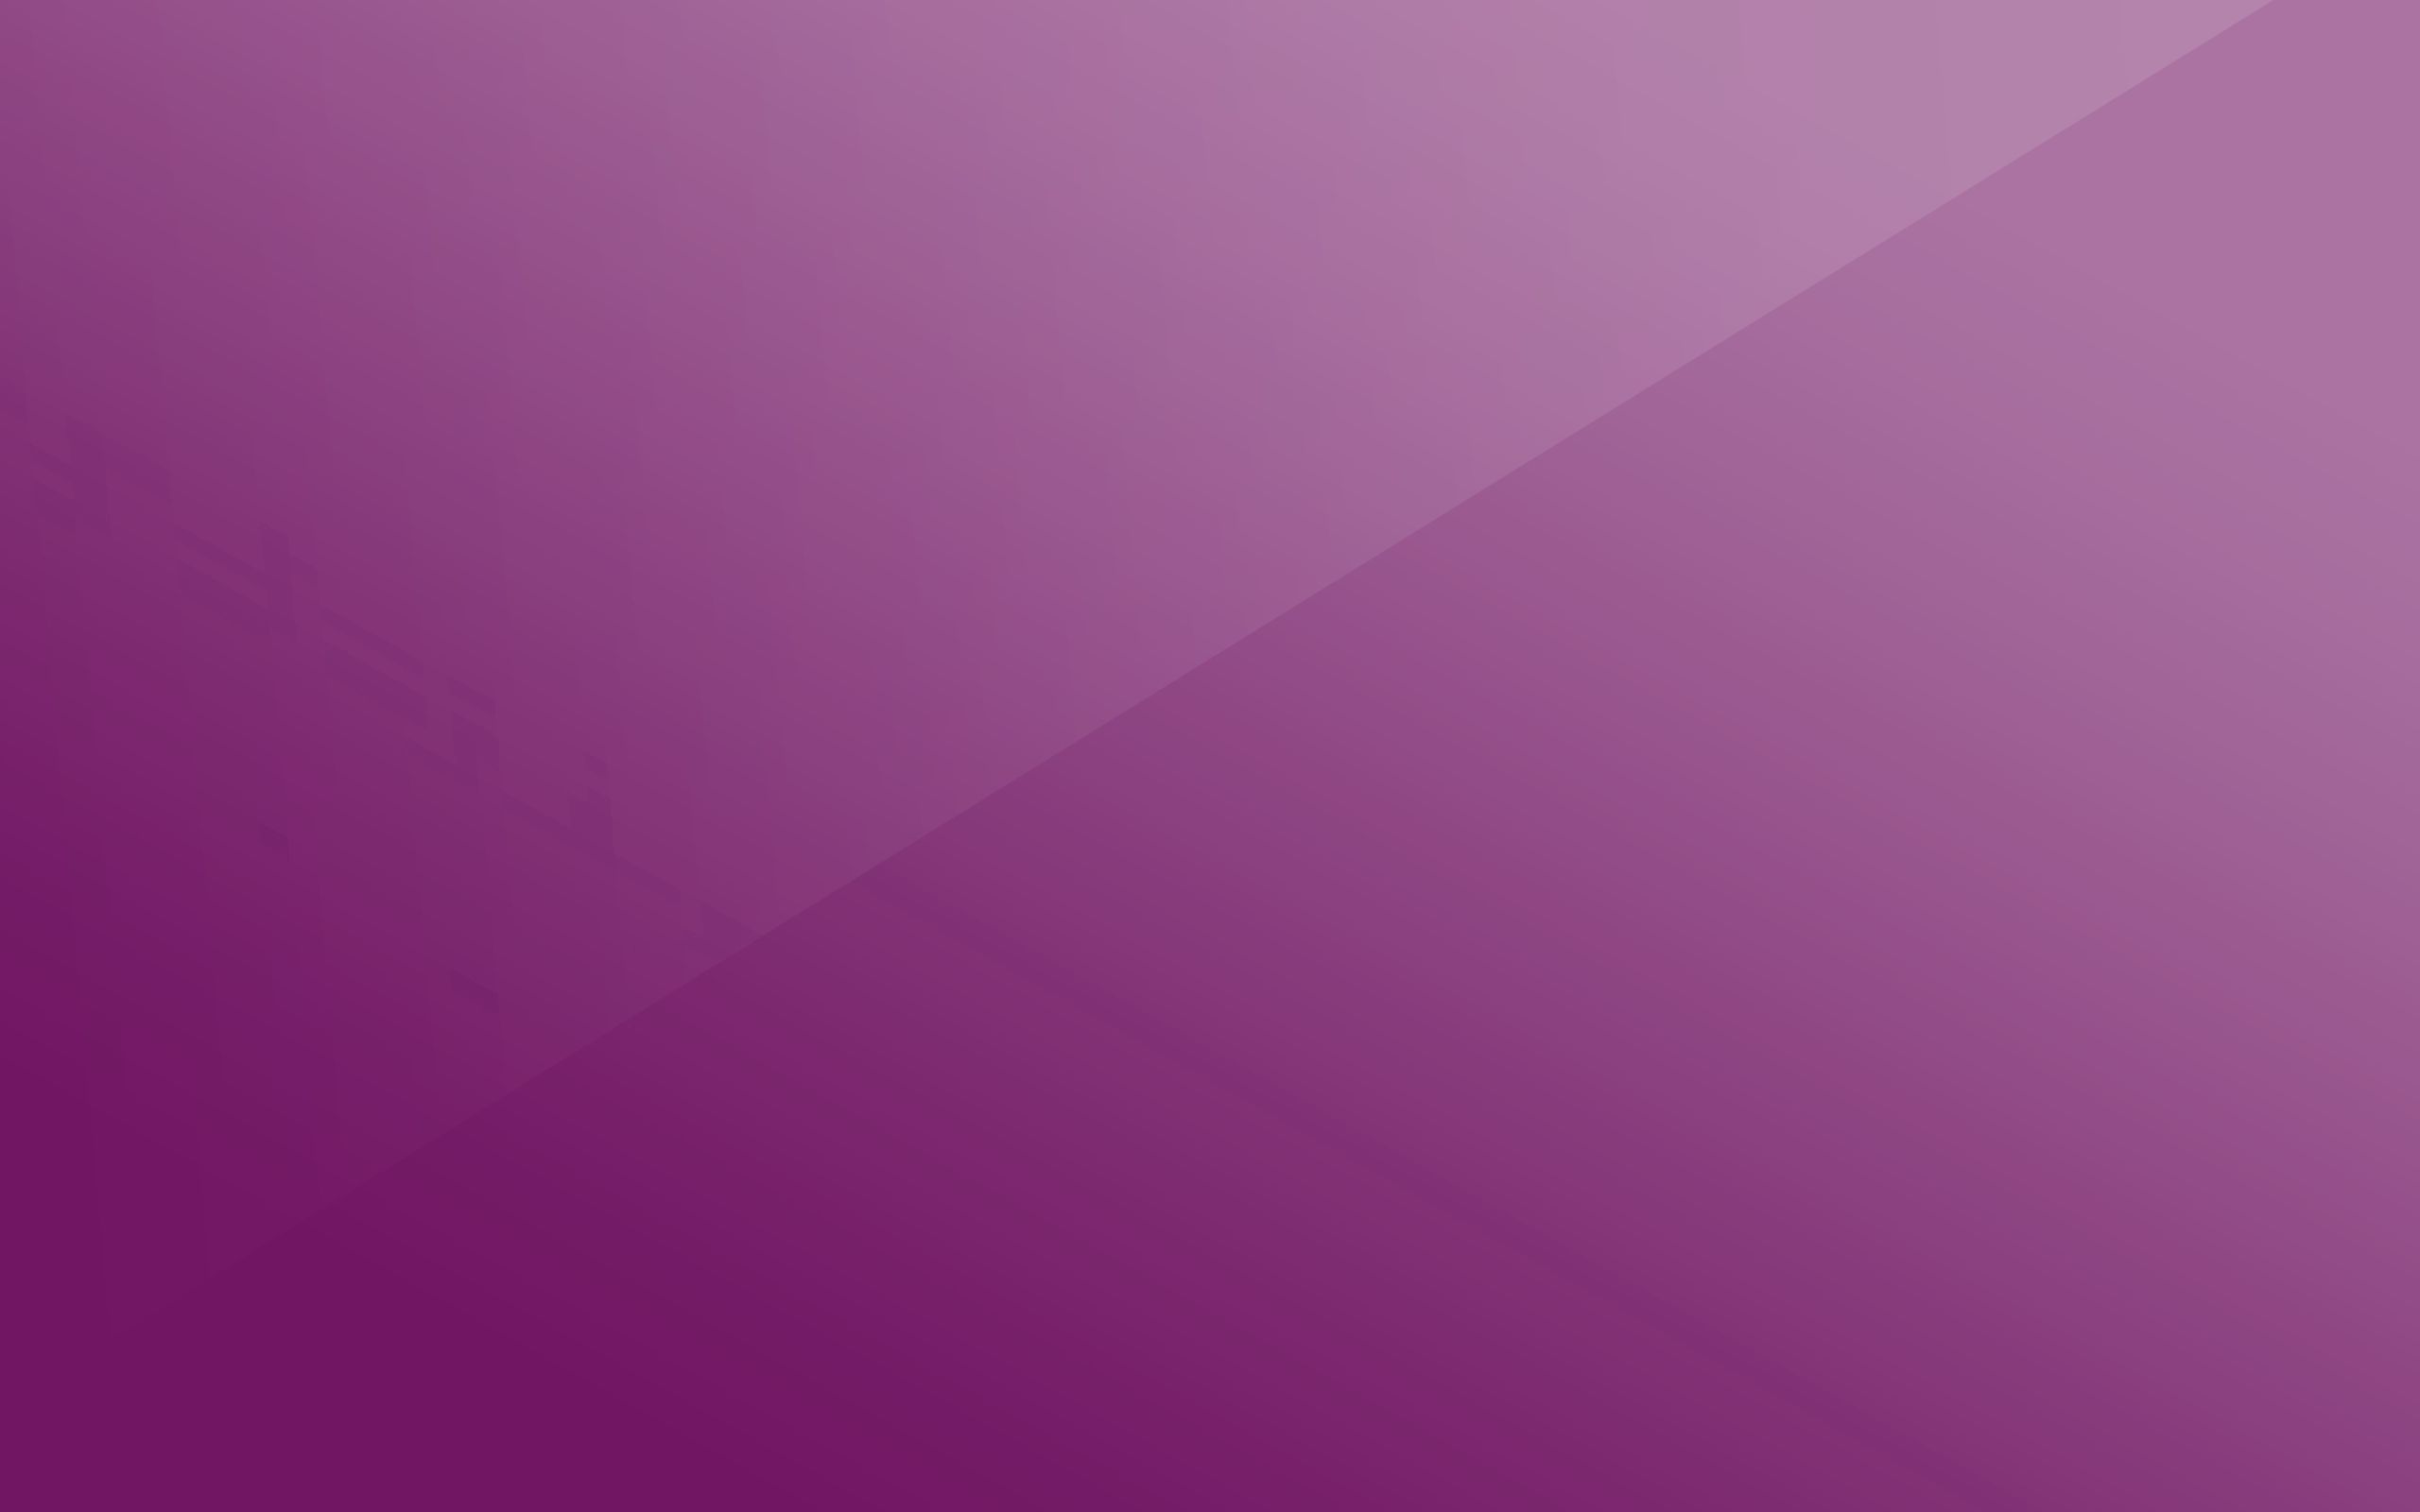 purple, abstract, light coloured, surface, background, violet, light, lines UHD